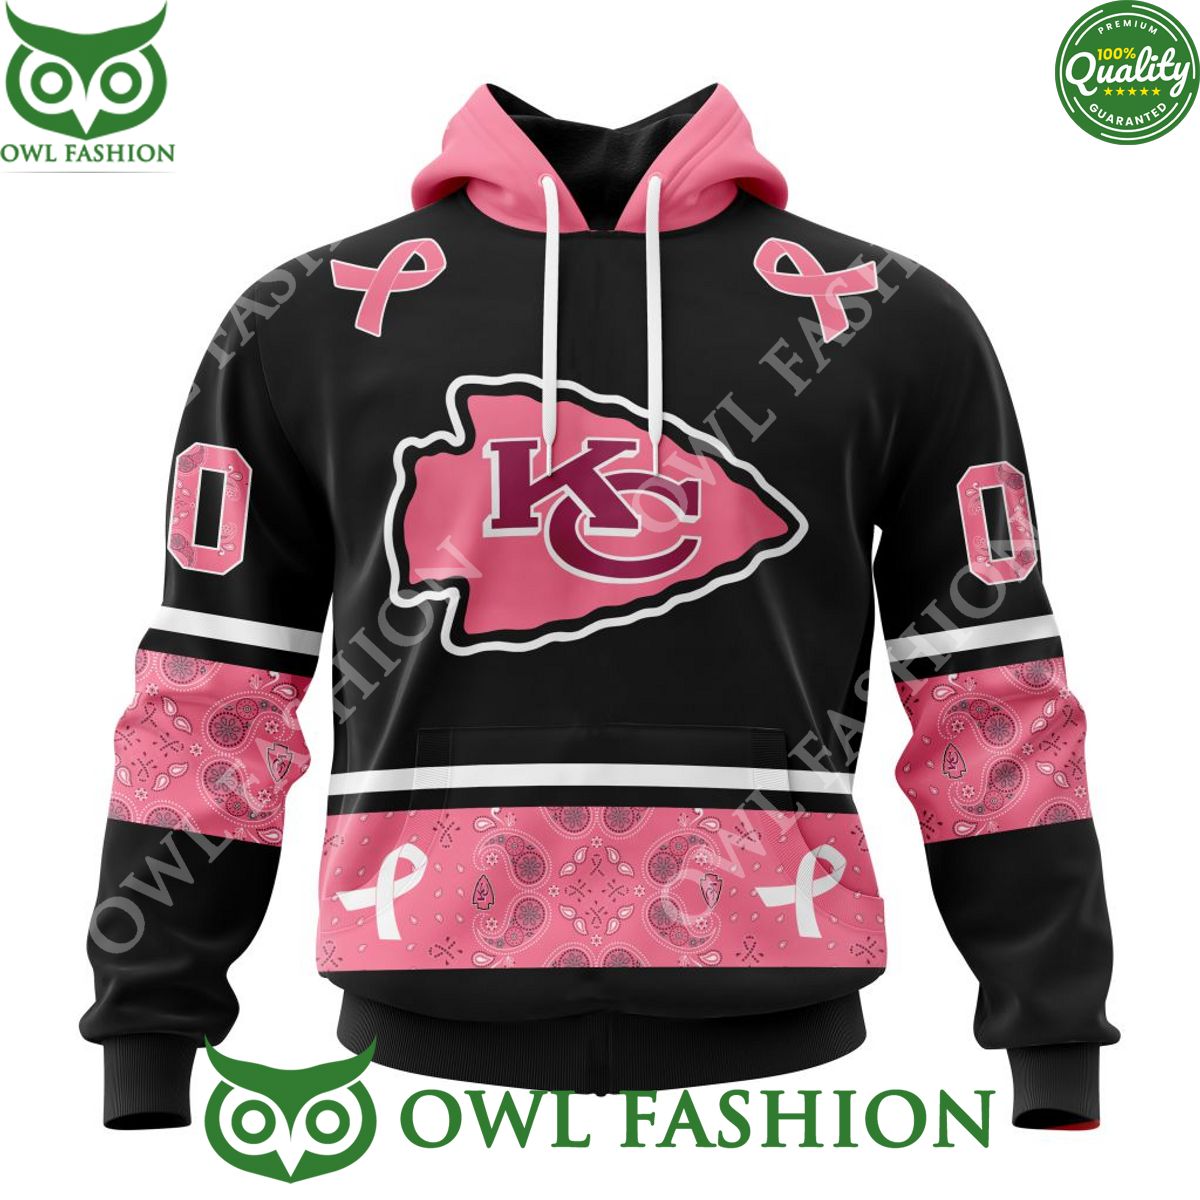 kansas city chiefs pink breast cancer nfl personalized 3d hoodie shirt 1 yqnJC.jpg